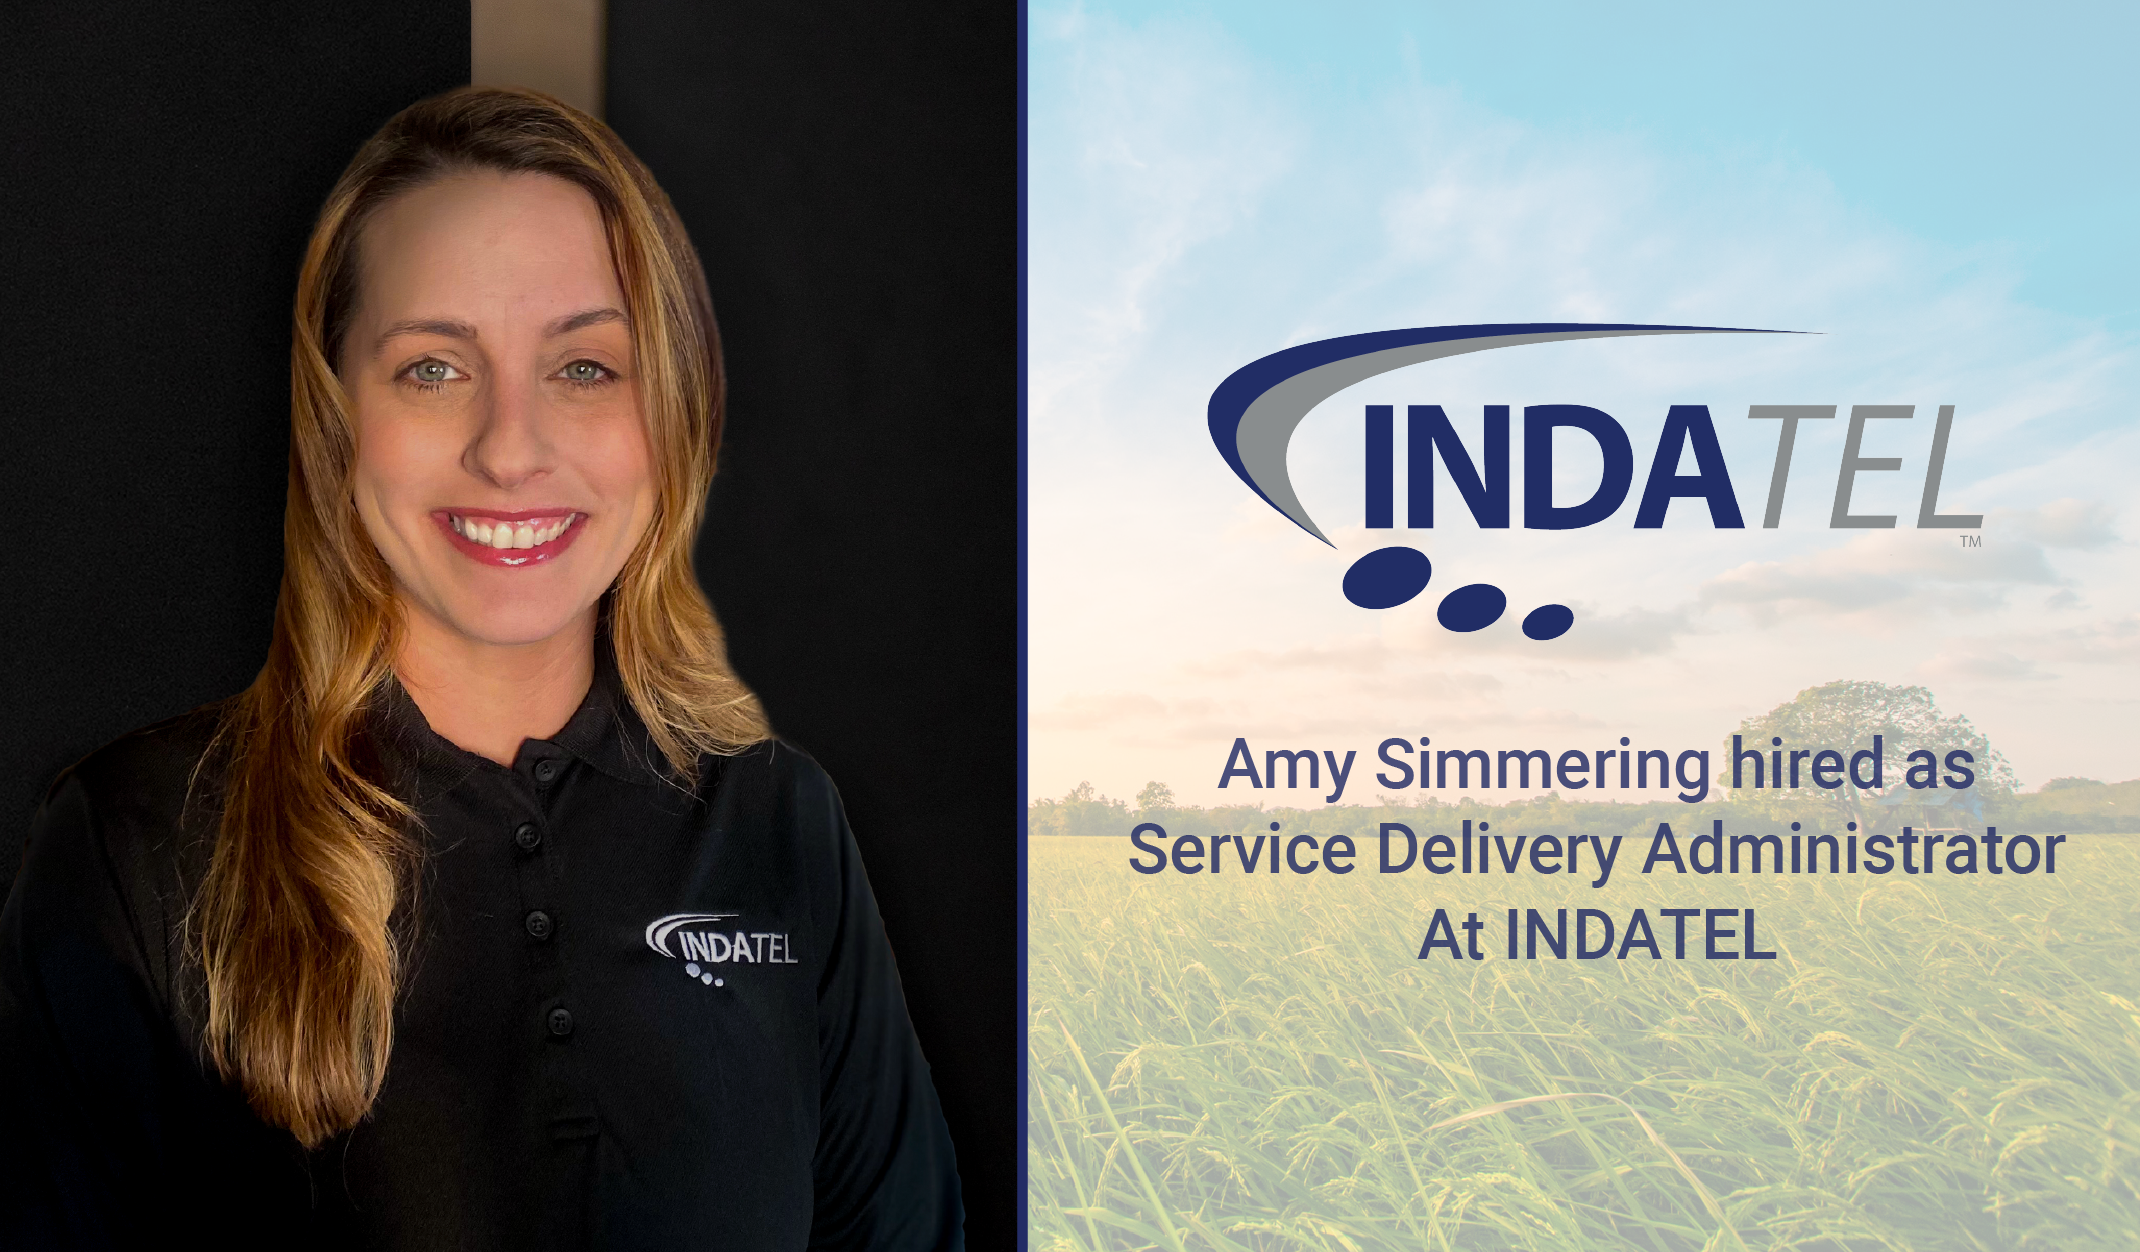 INDATEL Welcomes New Employee Amy Simmering as Service Delivery Administrator featured image